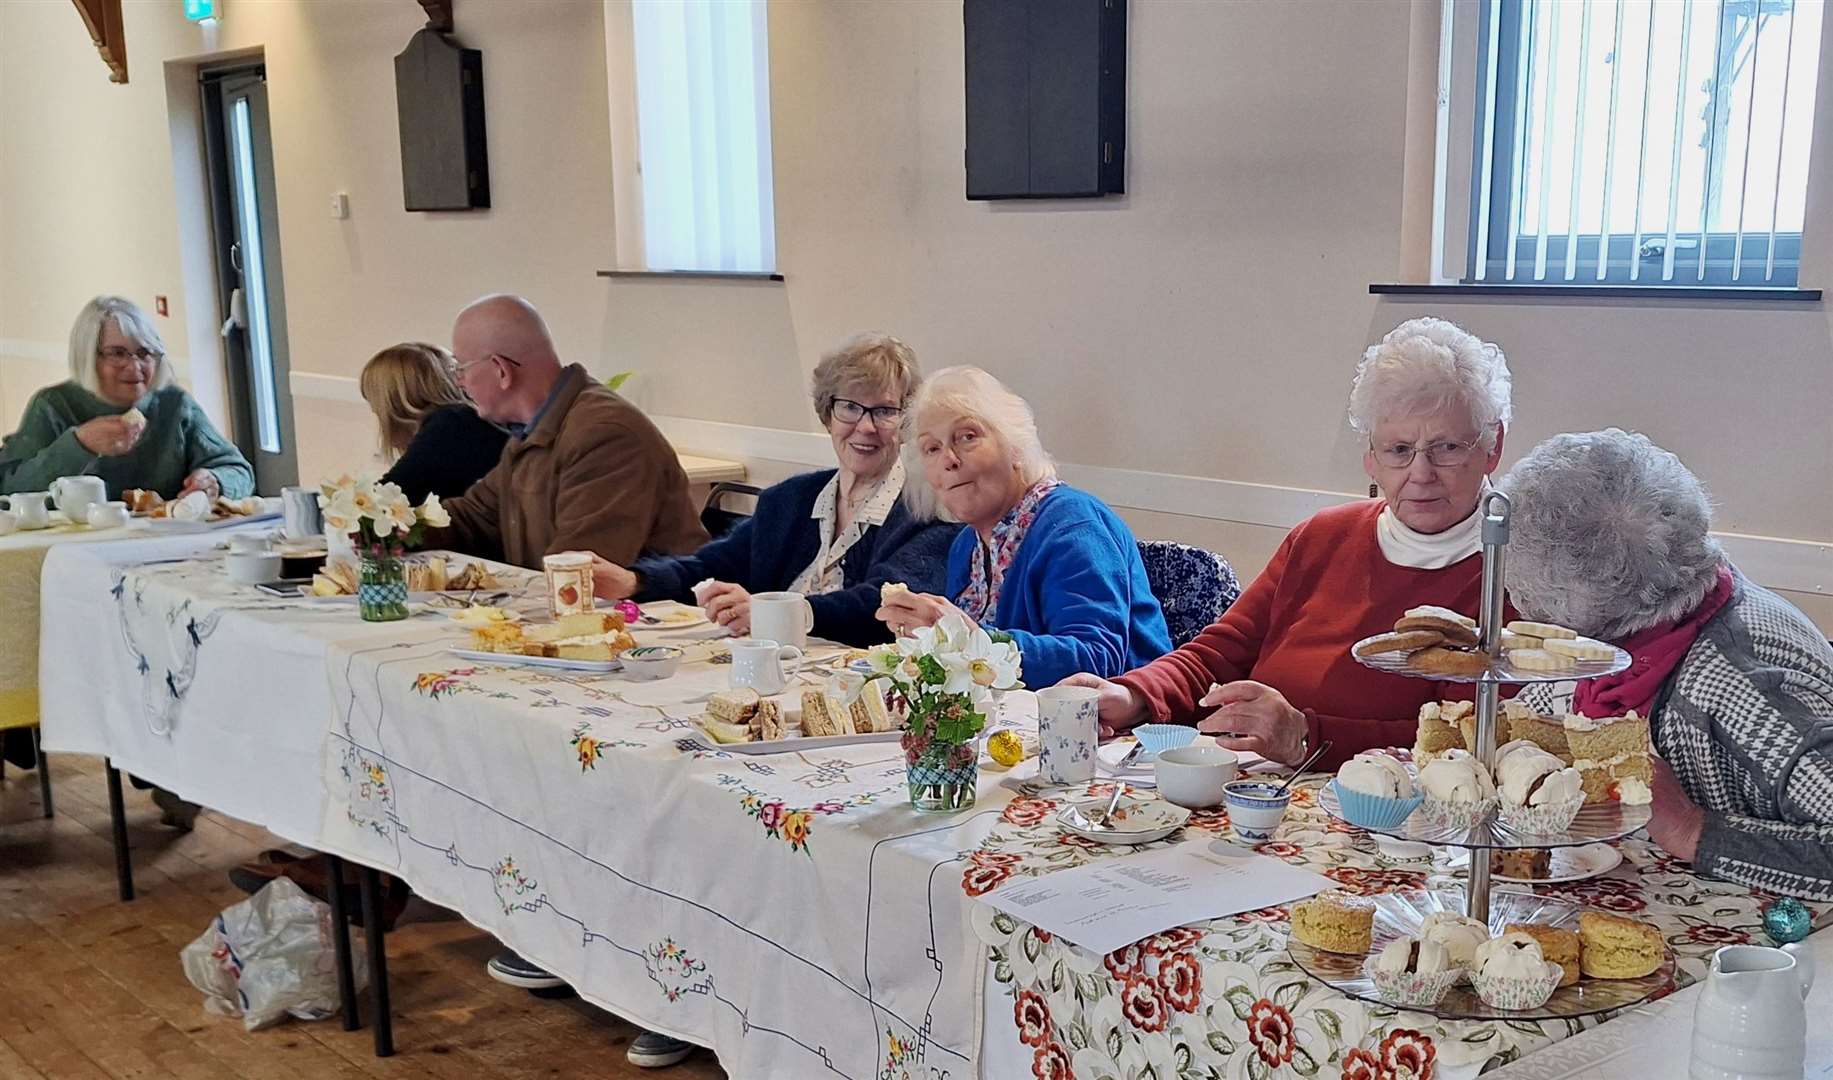 Members of Reiss Gardening Club having afternoon tea following their AGM. New members are welcome.